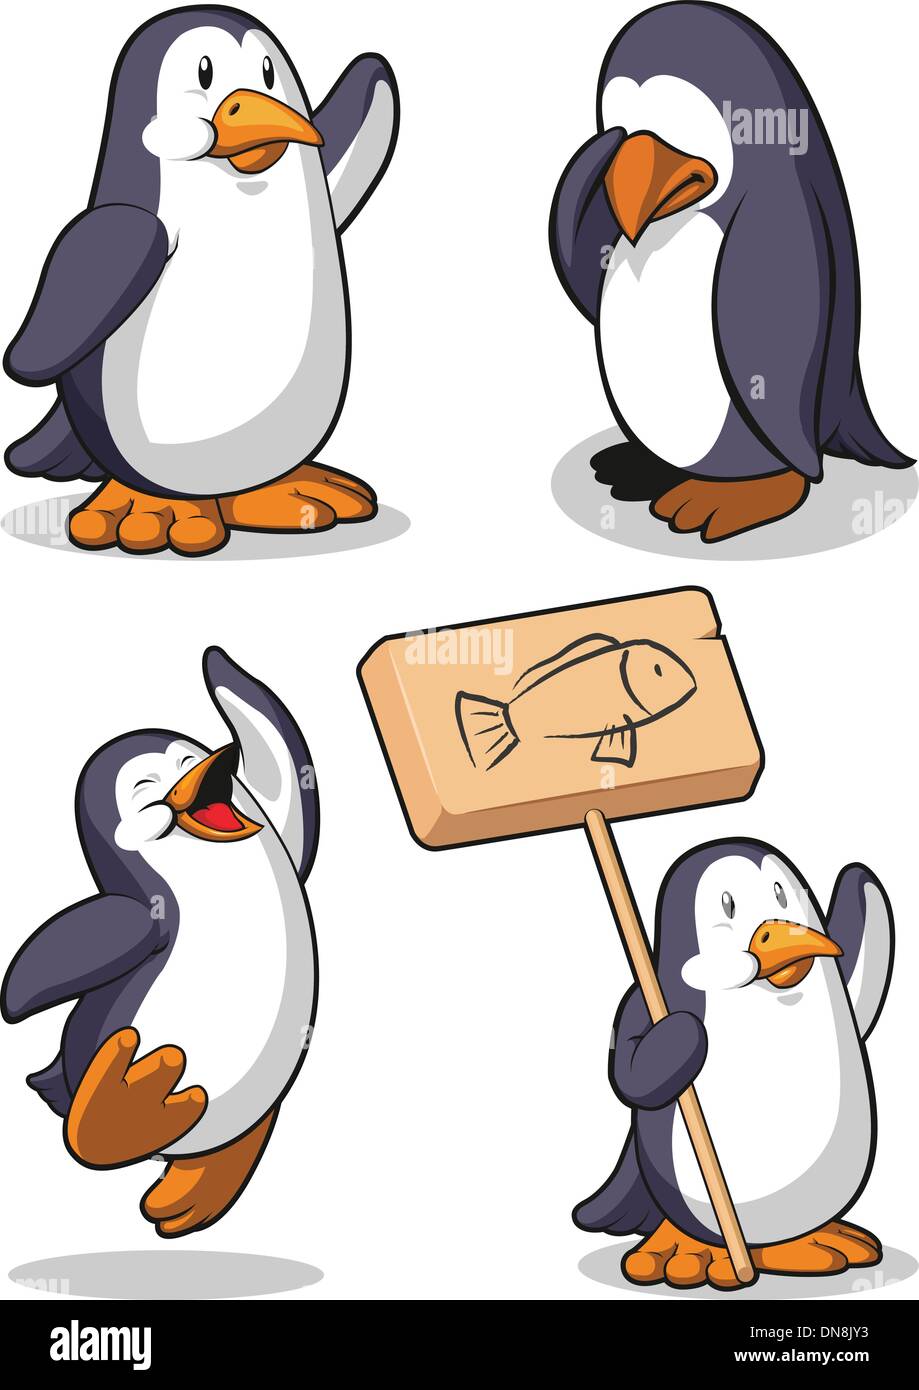 Penguin in Several Poses - Happy, Sad, Jumping & Holding Sign Stock Vector